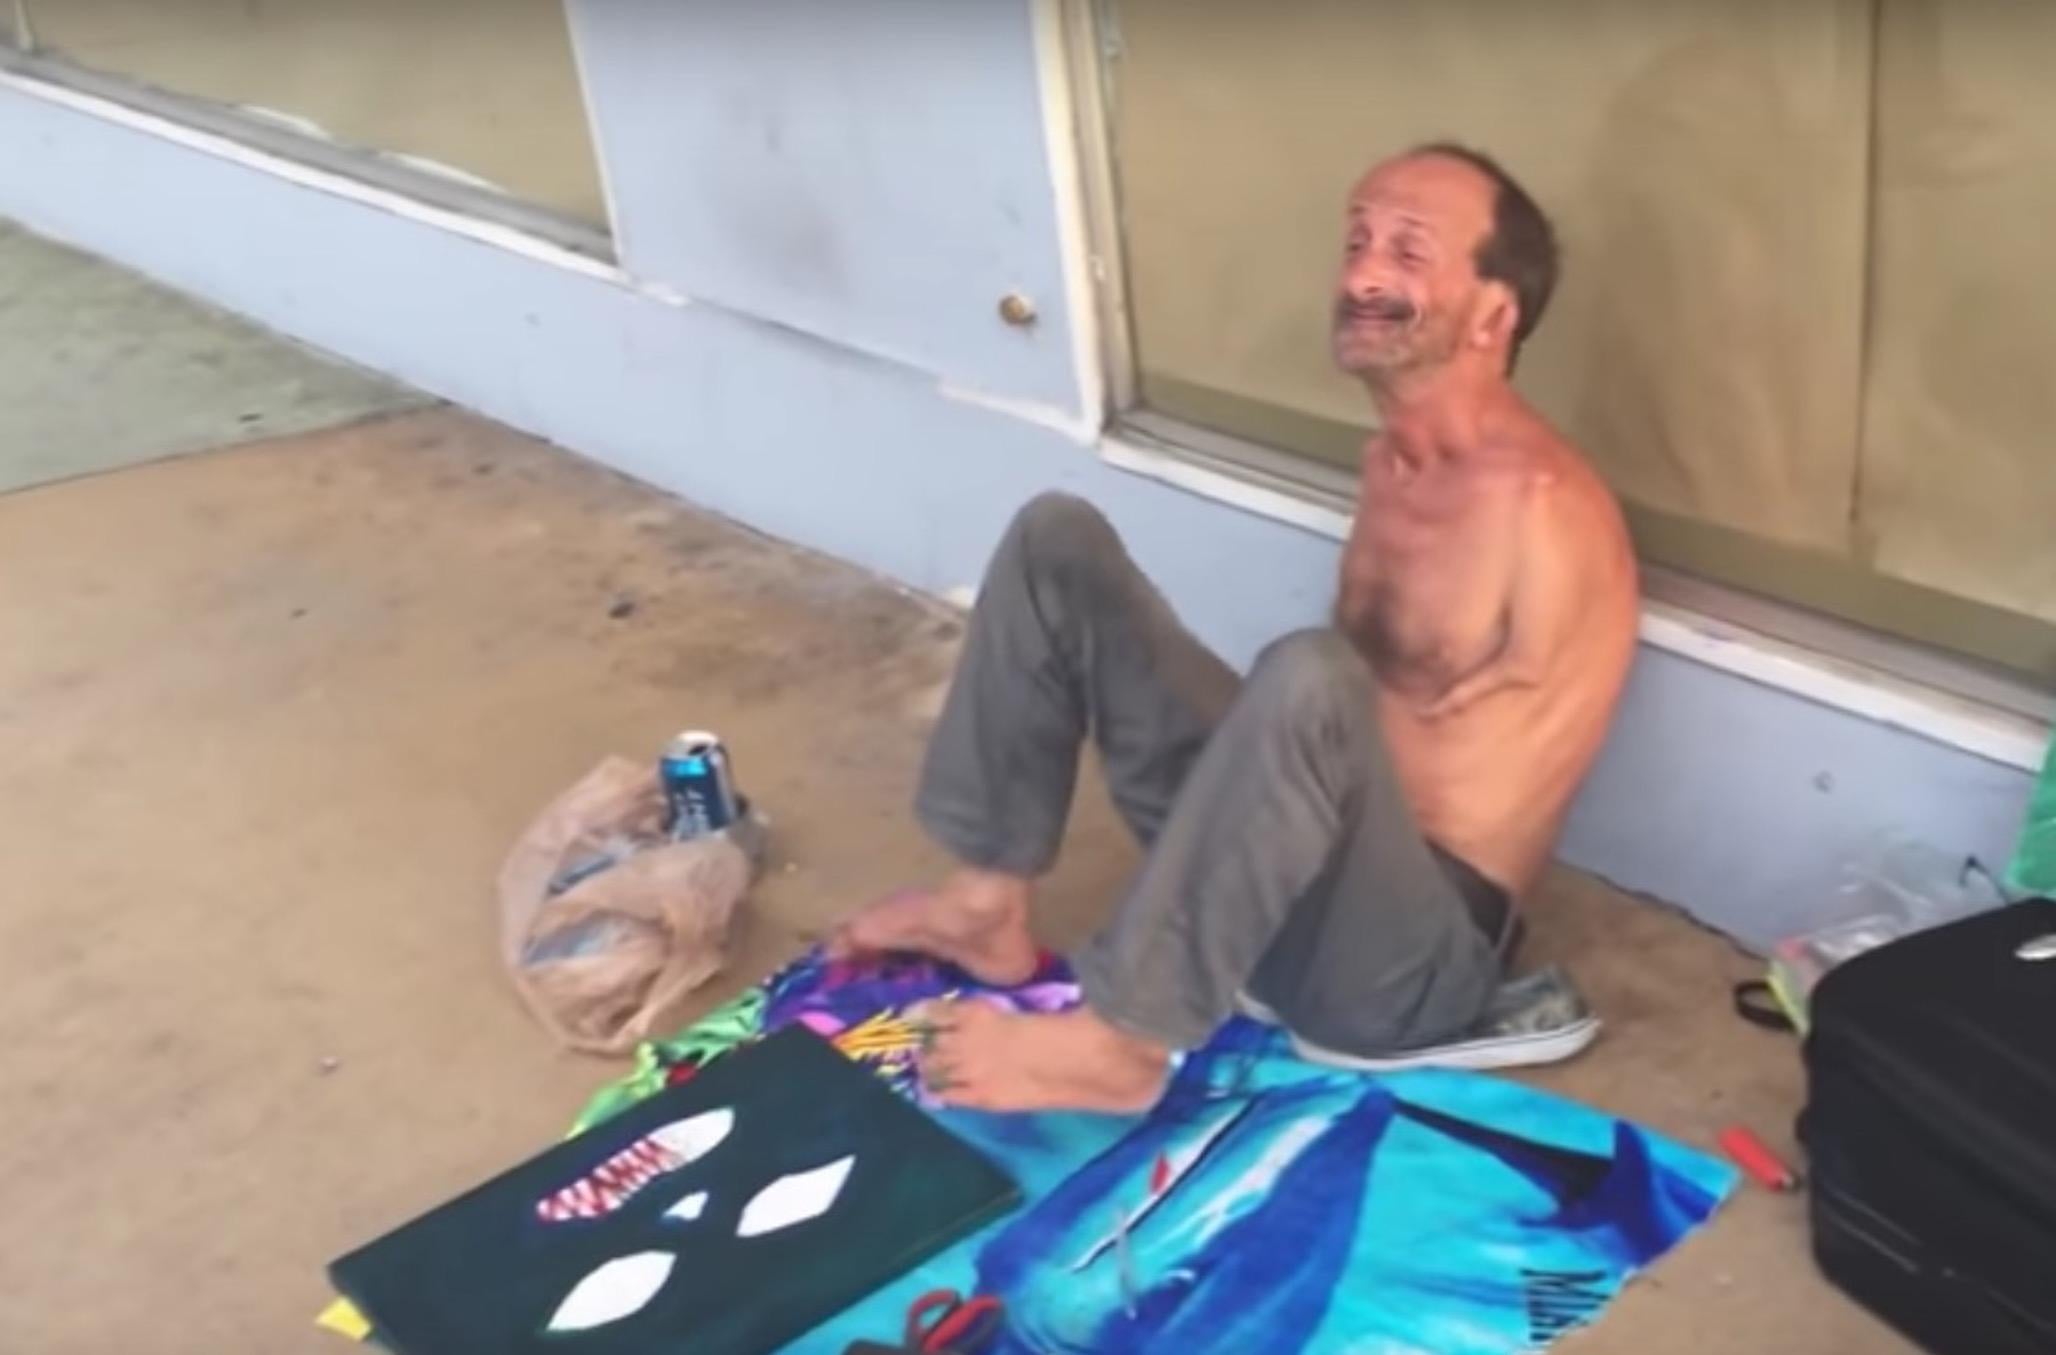 Jonathan Crenshaw, a Miami street artist with a reportedly troubled past who paints using his feet, has become a local well-known figure in Miami Beach.